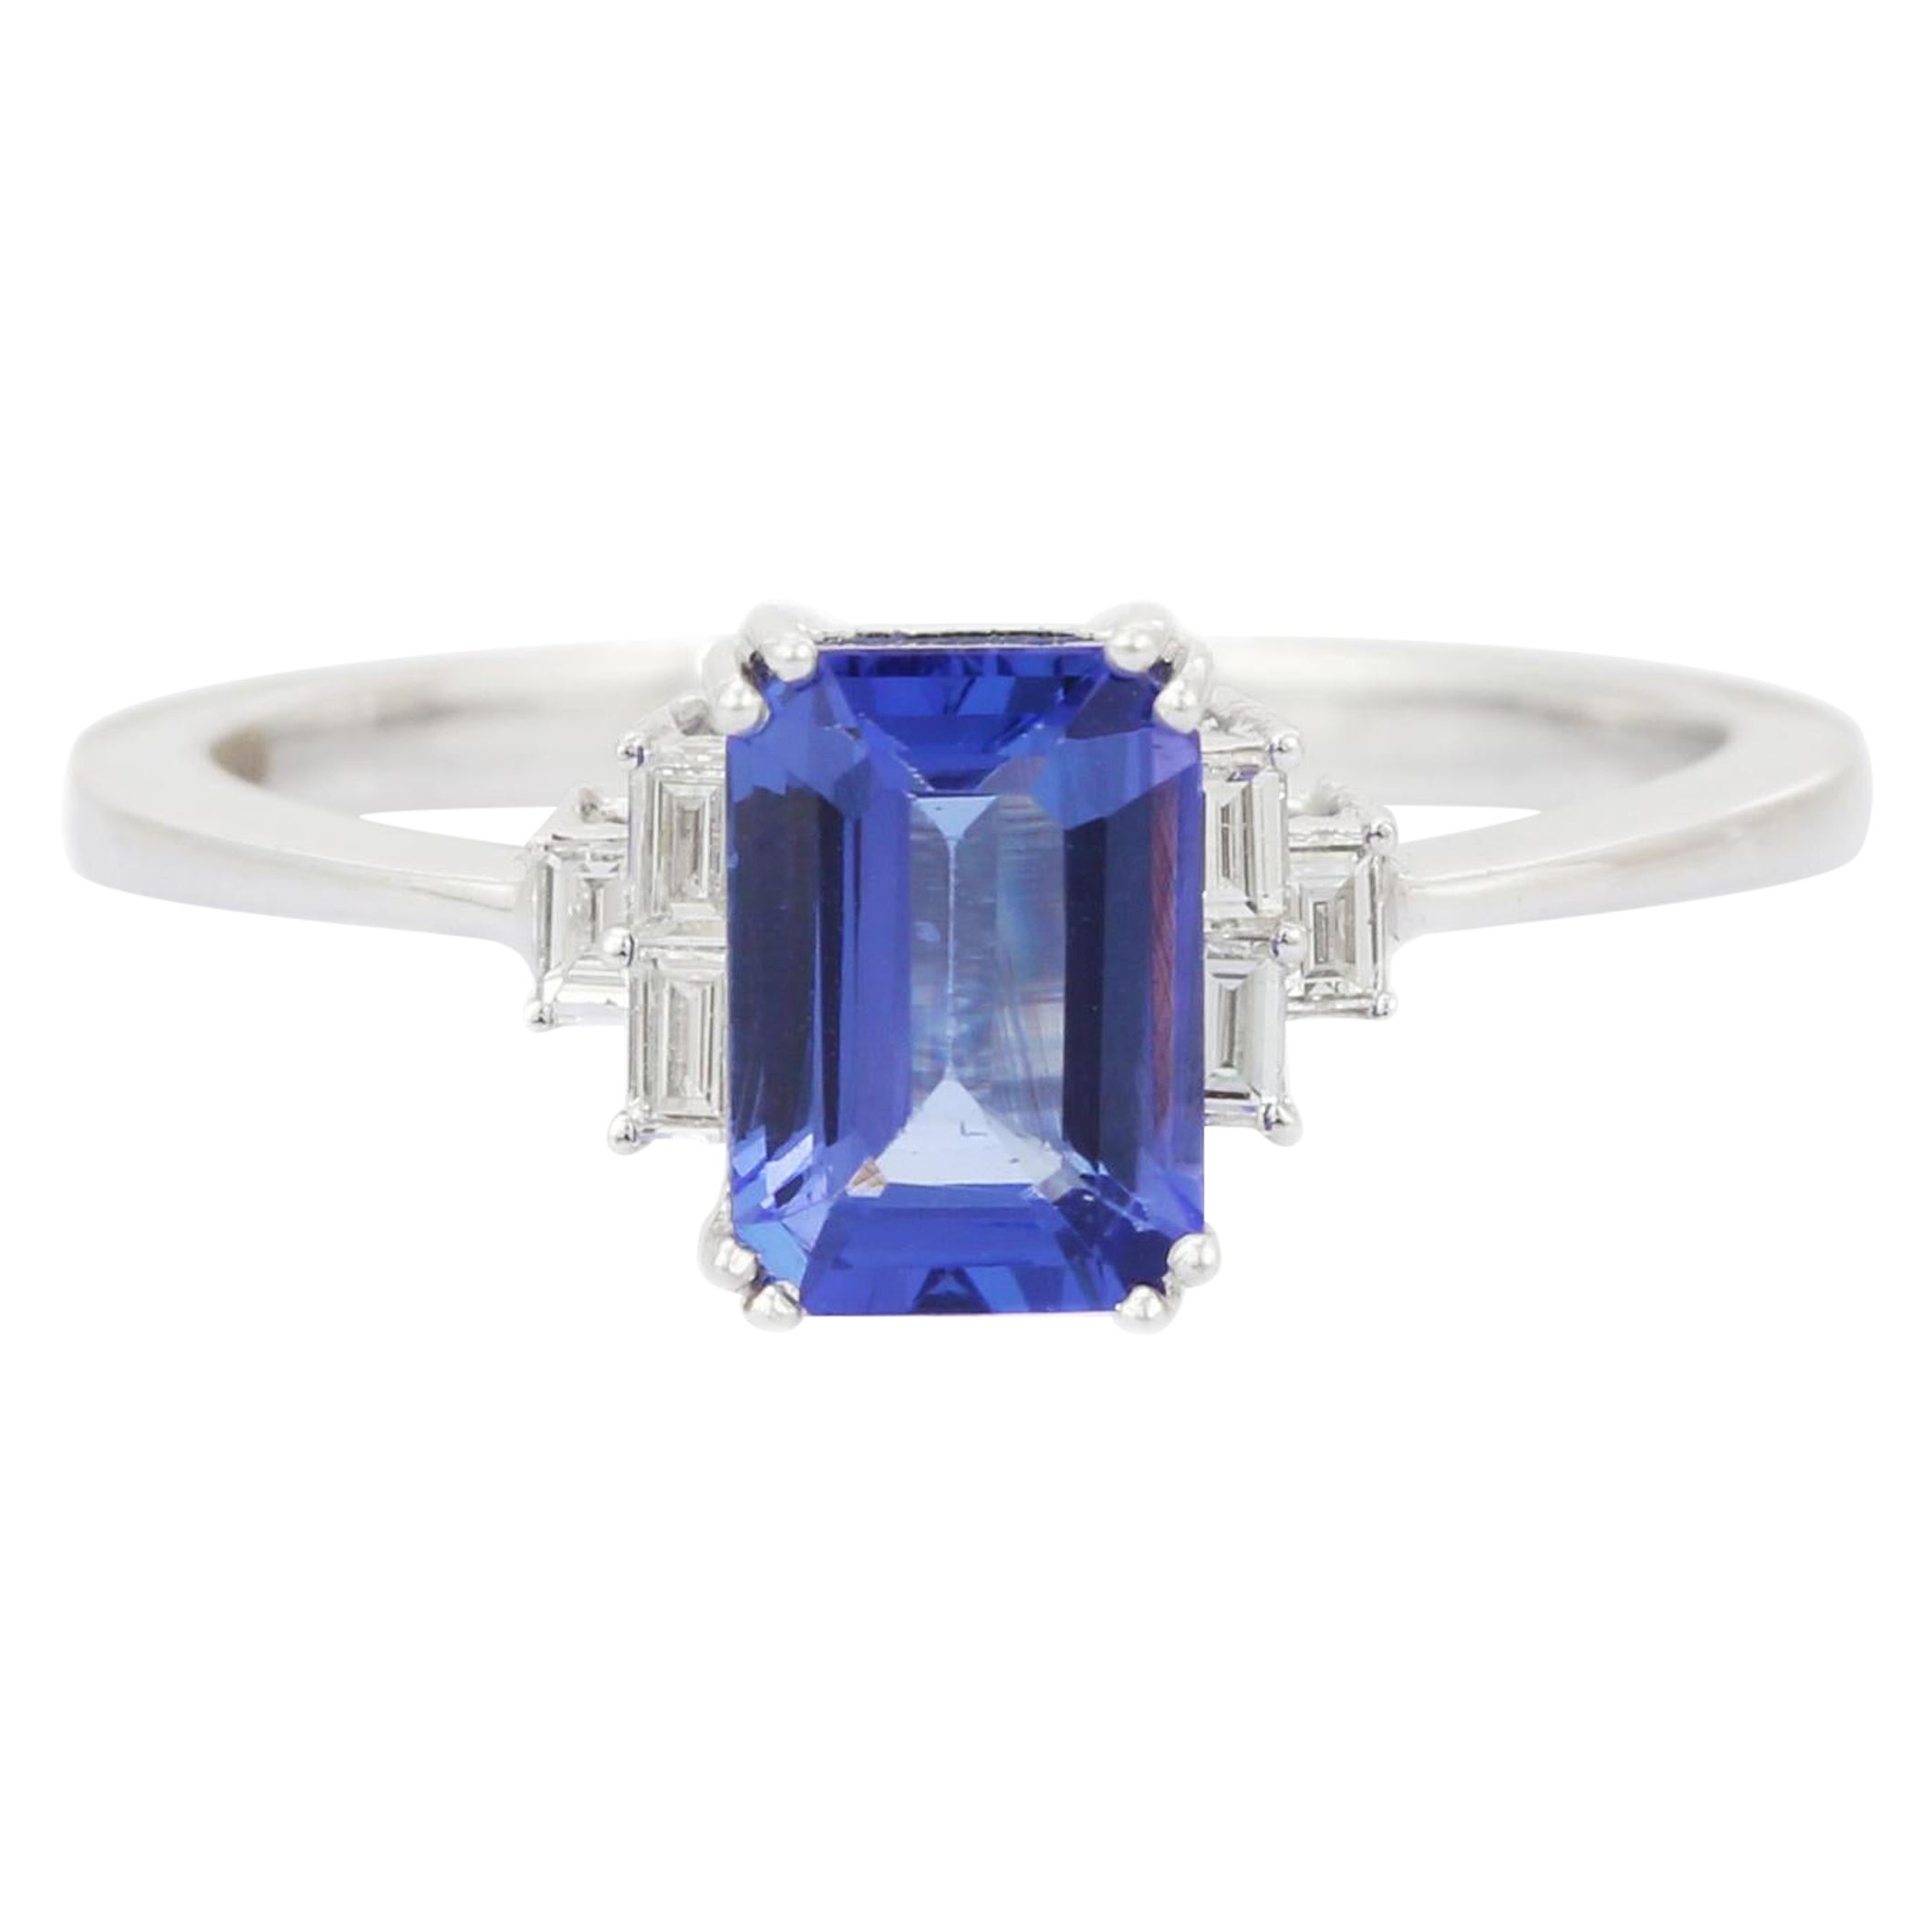 Octagon Shape Tanzanite Ring with Diamonds in 18K White Gold